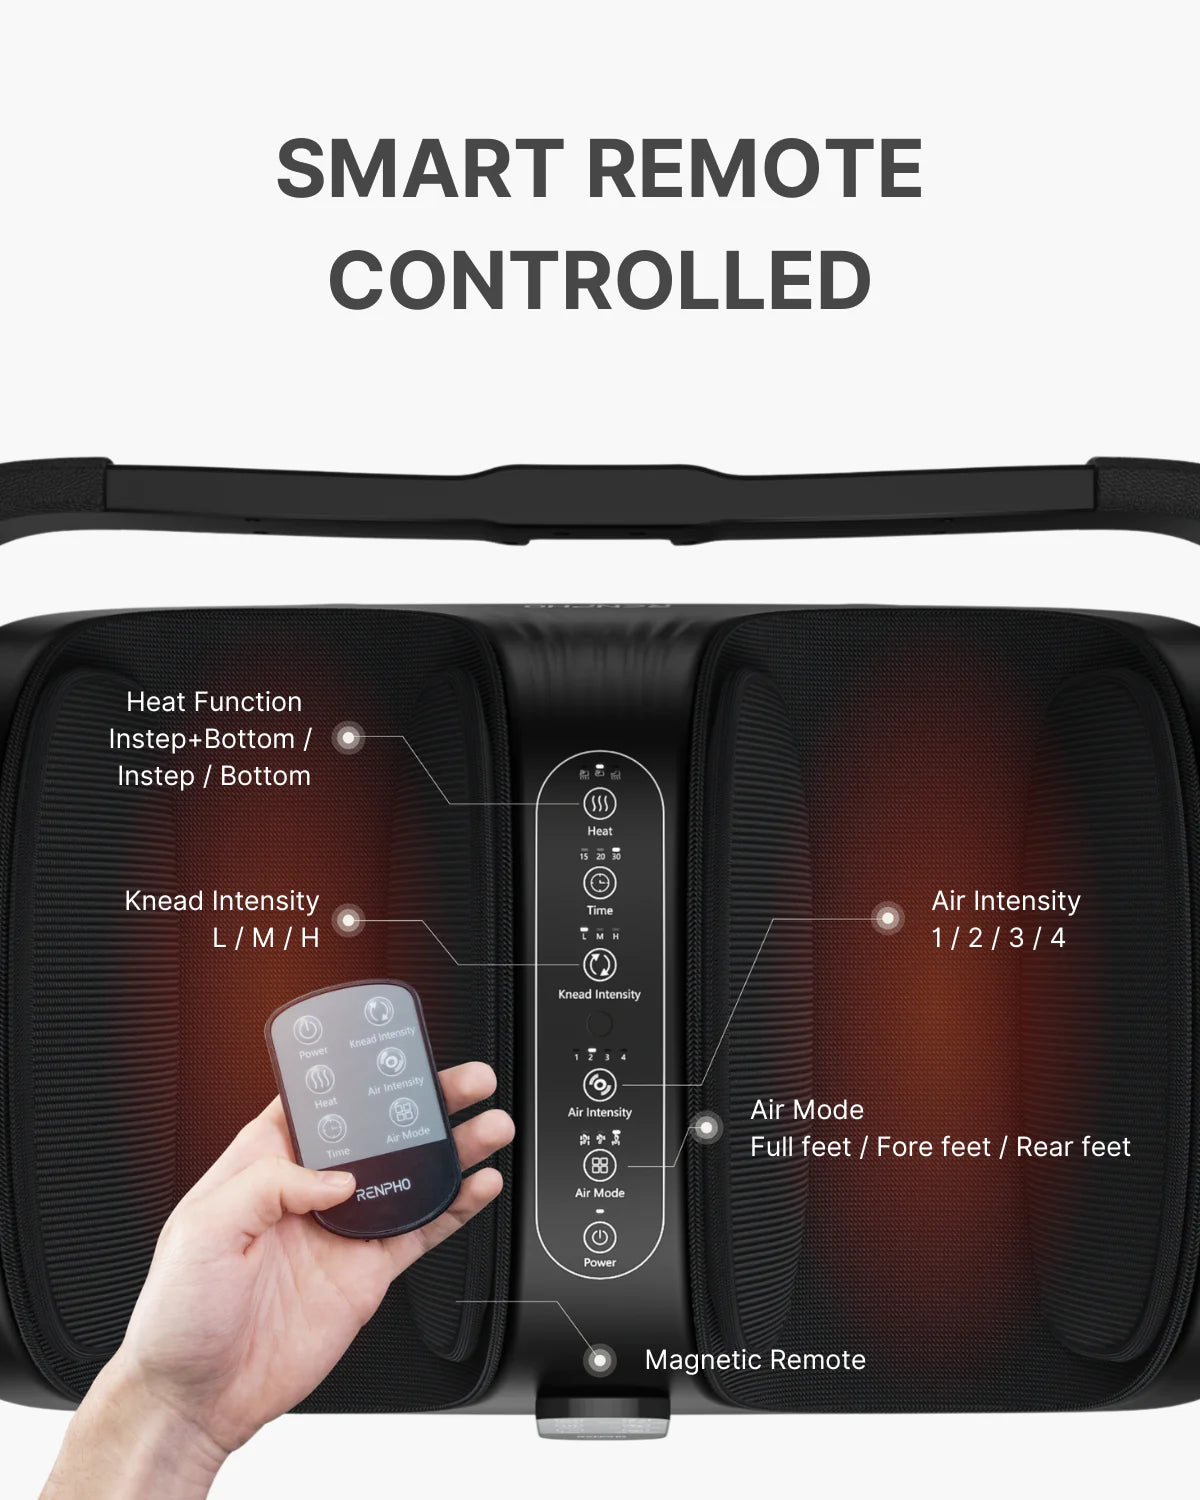 An advertisement for a Renpho Shiatsu Foot and Calf Massager featuring multiple settings. The remote is displayed with buttons to adjust heat, kneading, and air intensity. Magnetic remote placement shown on the massager enhances.